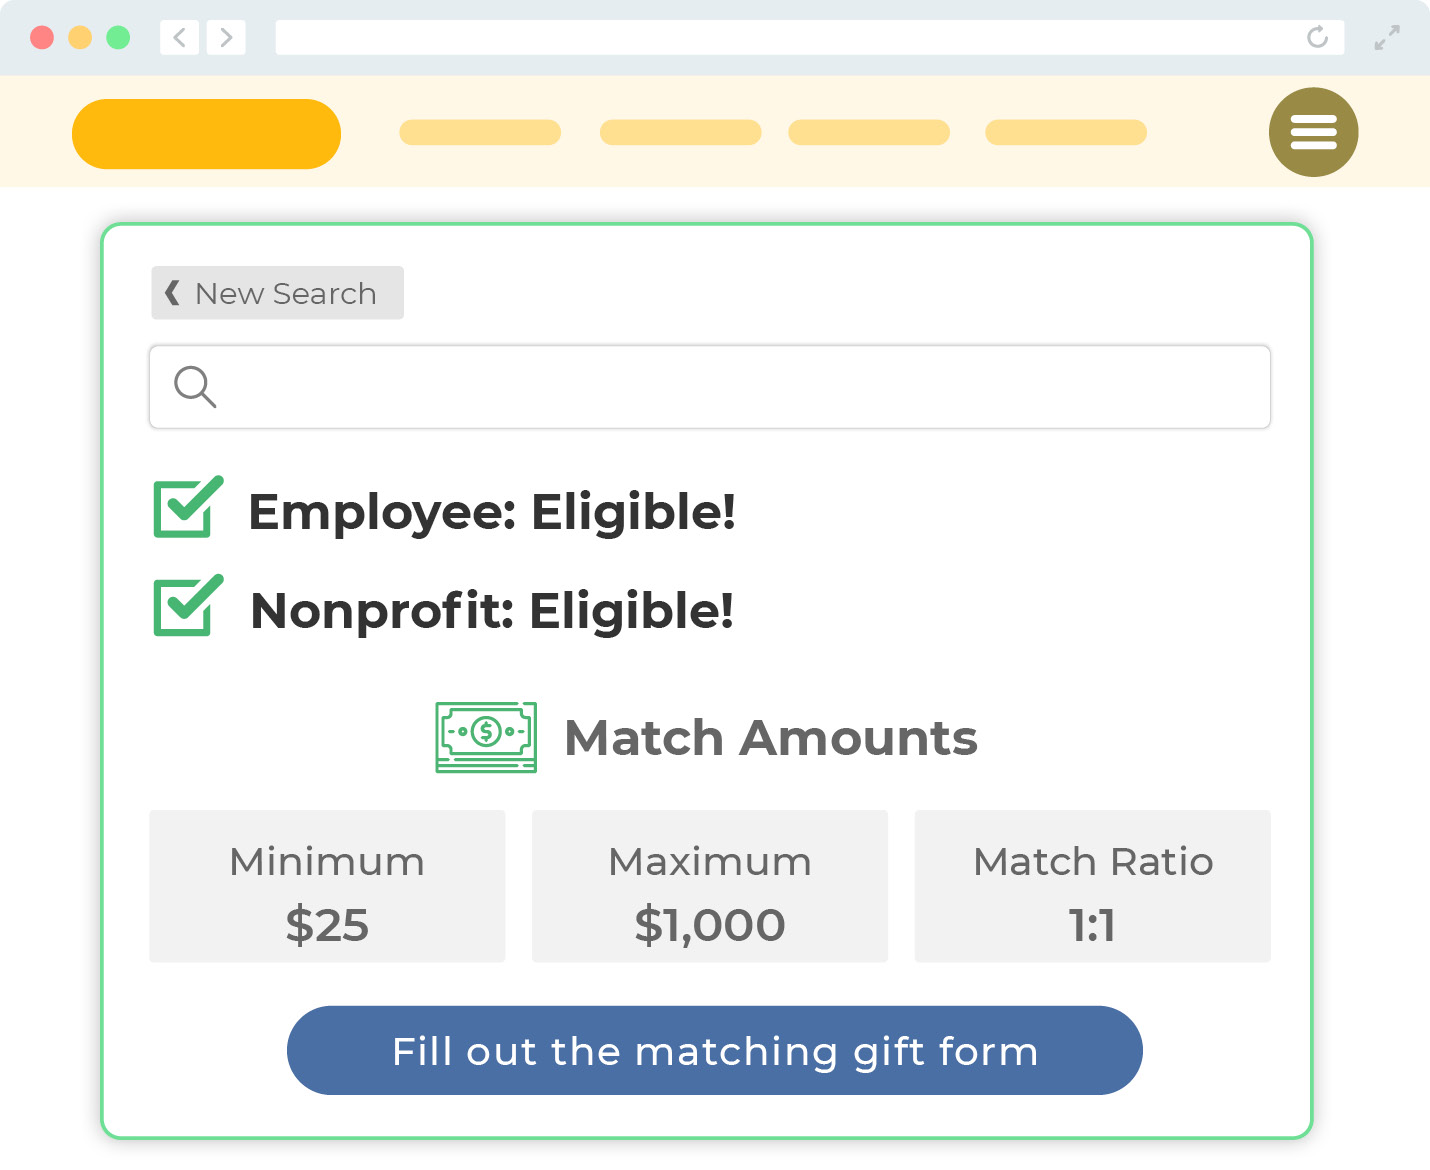 This graphic shows what a matching gift database looks like on the website of a higher education institution.